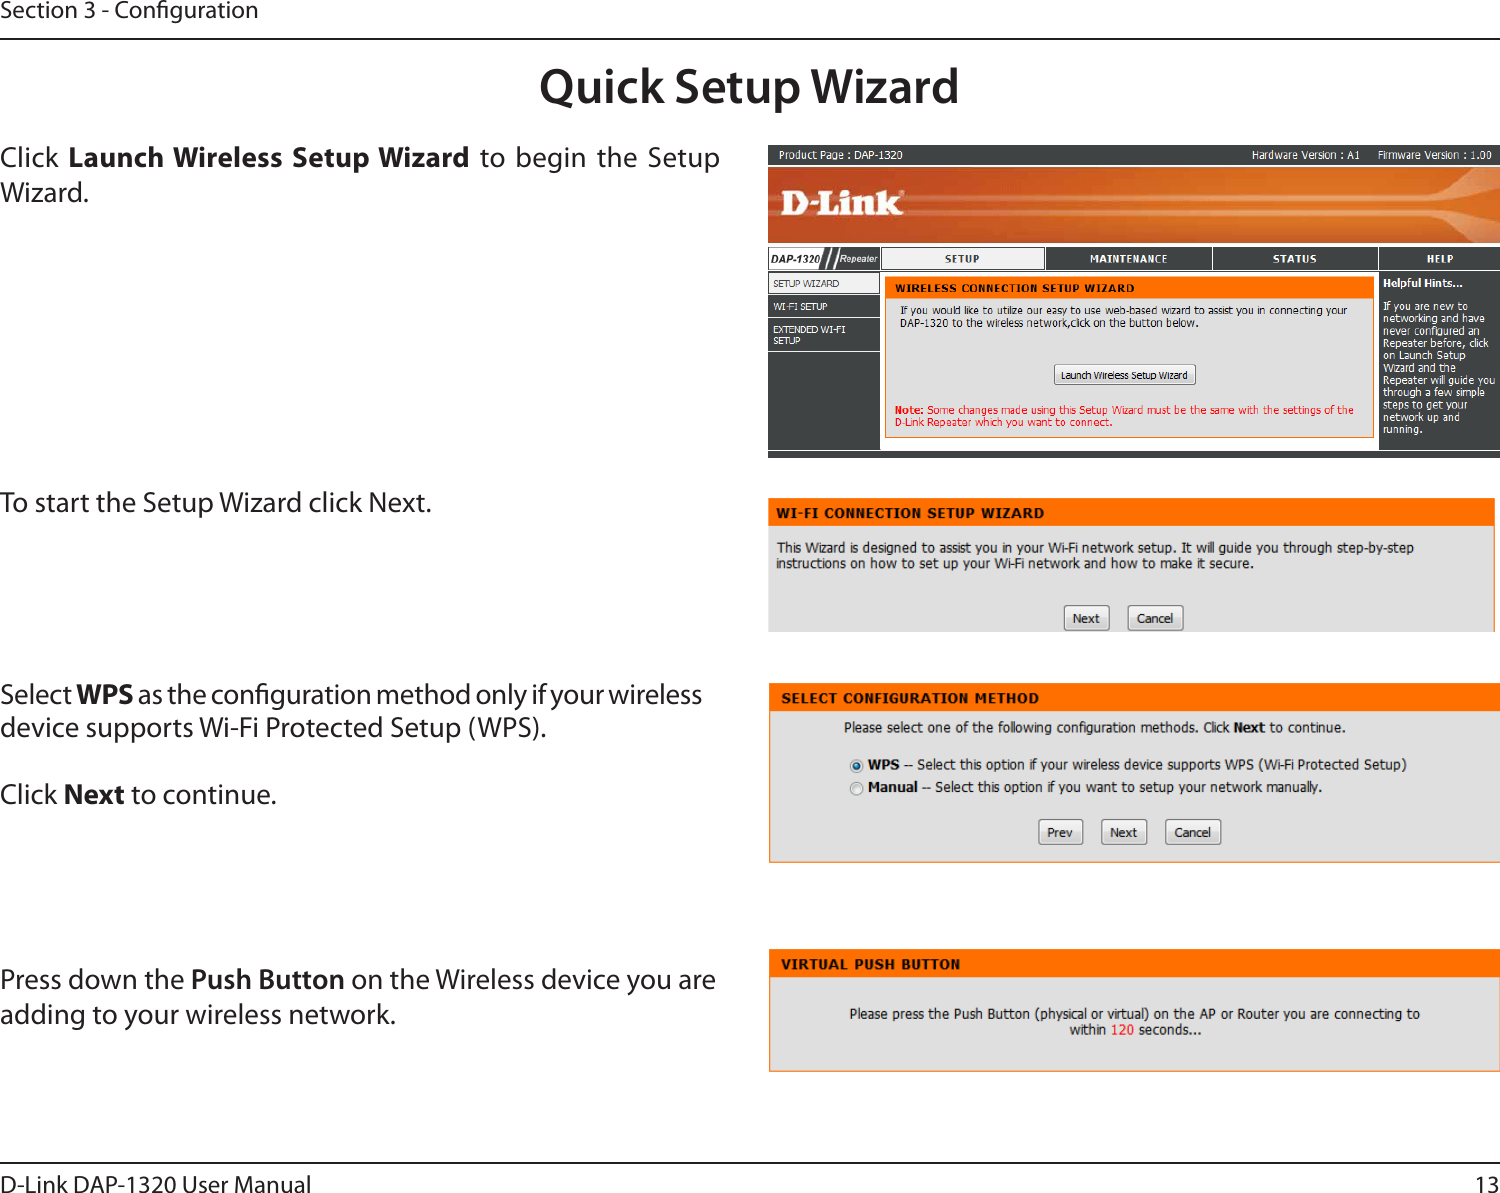 13D-Link DAP-1320 User ManualSection 3 - CongurationQuick Setup WizardClick Launch Wireless Setup Wizard to begin the Setup Wizard.To start the Setup Wizard click Next.Select WPS as the conguration method only if your wireless device supports Wi-Fi Protected Setup (WPS). Click Next to continue.Press down the Push Button on the Wireless device you are adding to your wireless network. 